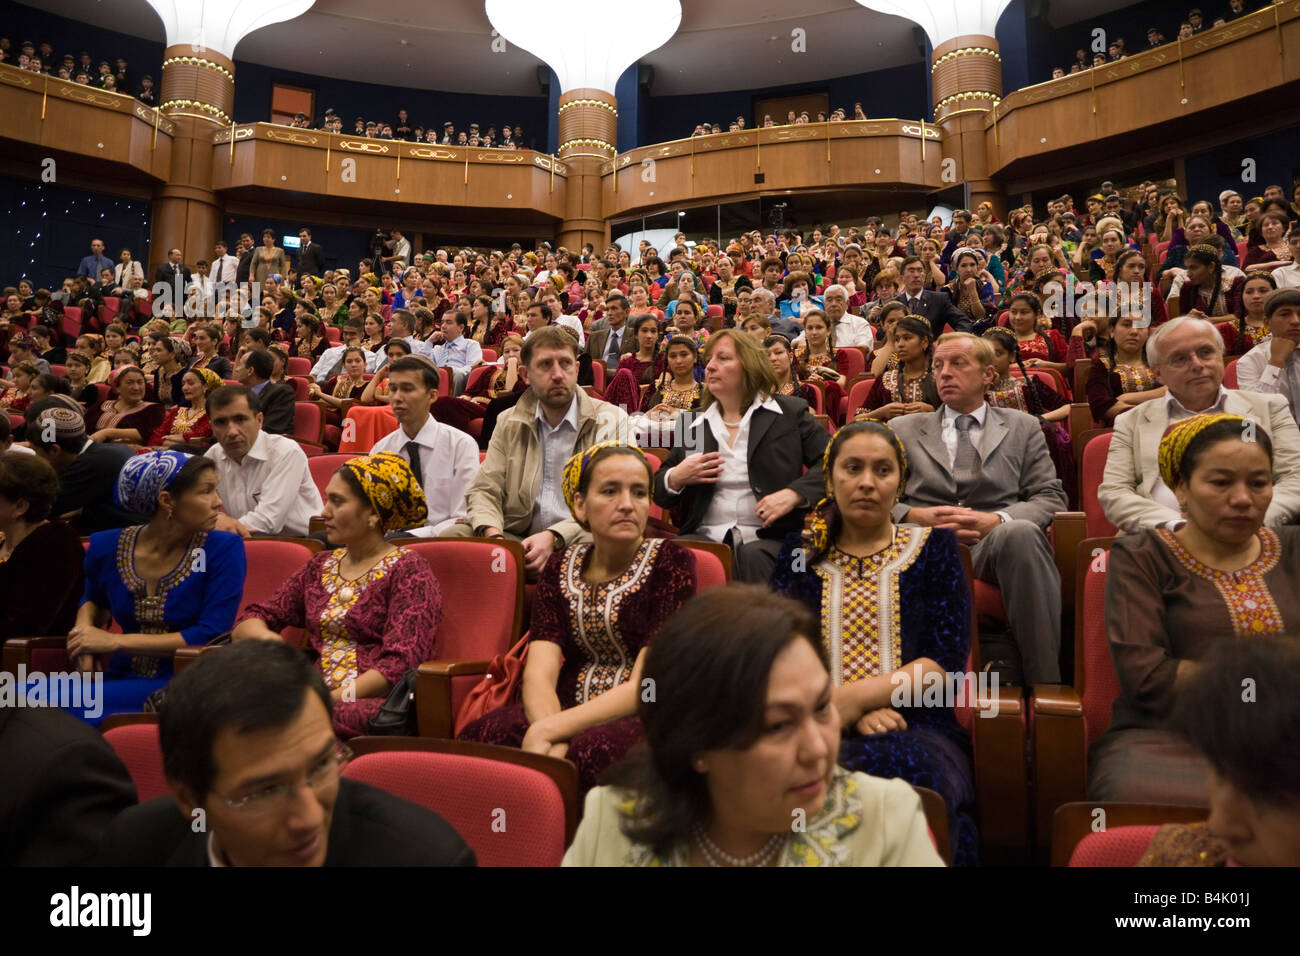 Audience of delegates at opening of international conference, Ashqabat, Turkmenistan Stock Photo